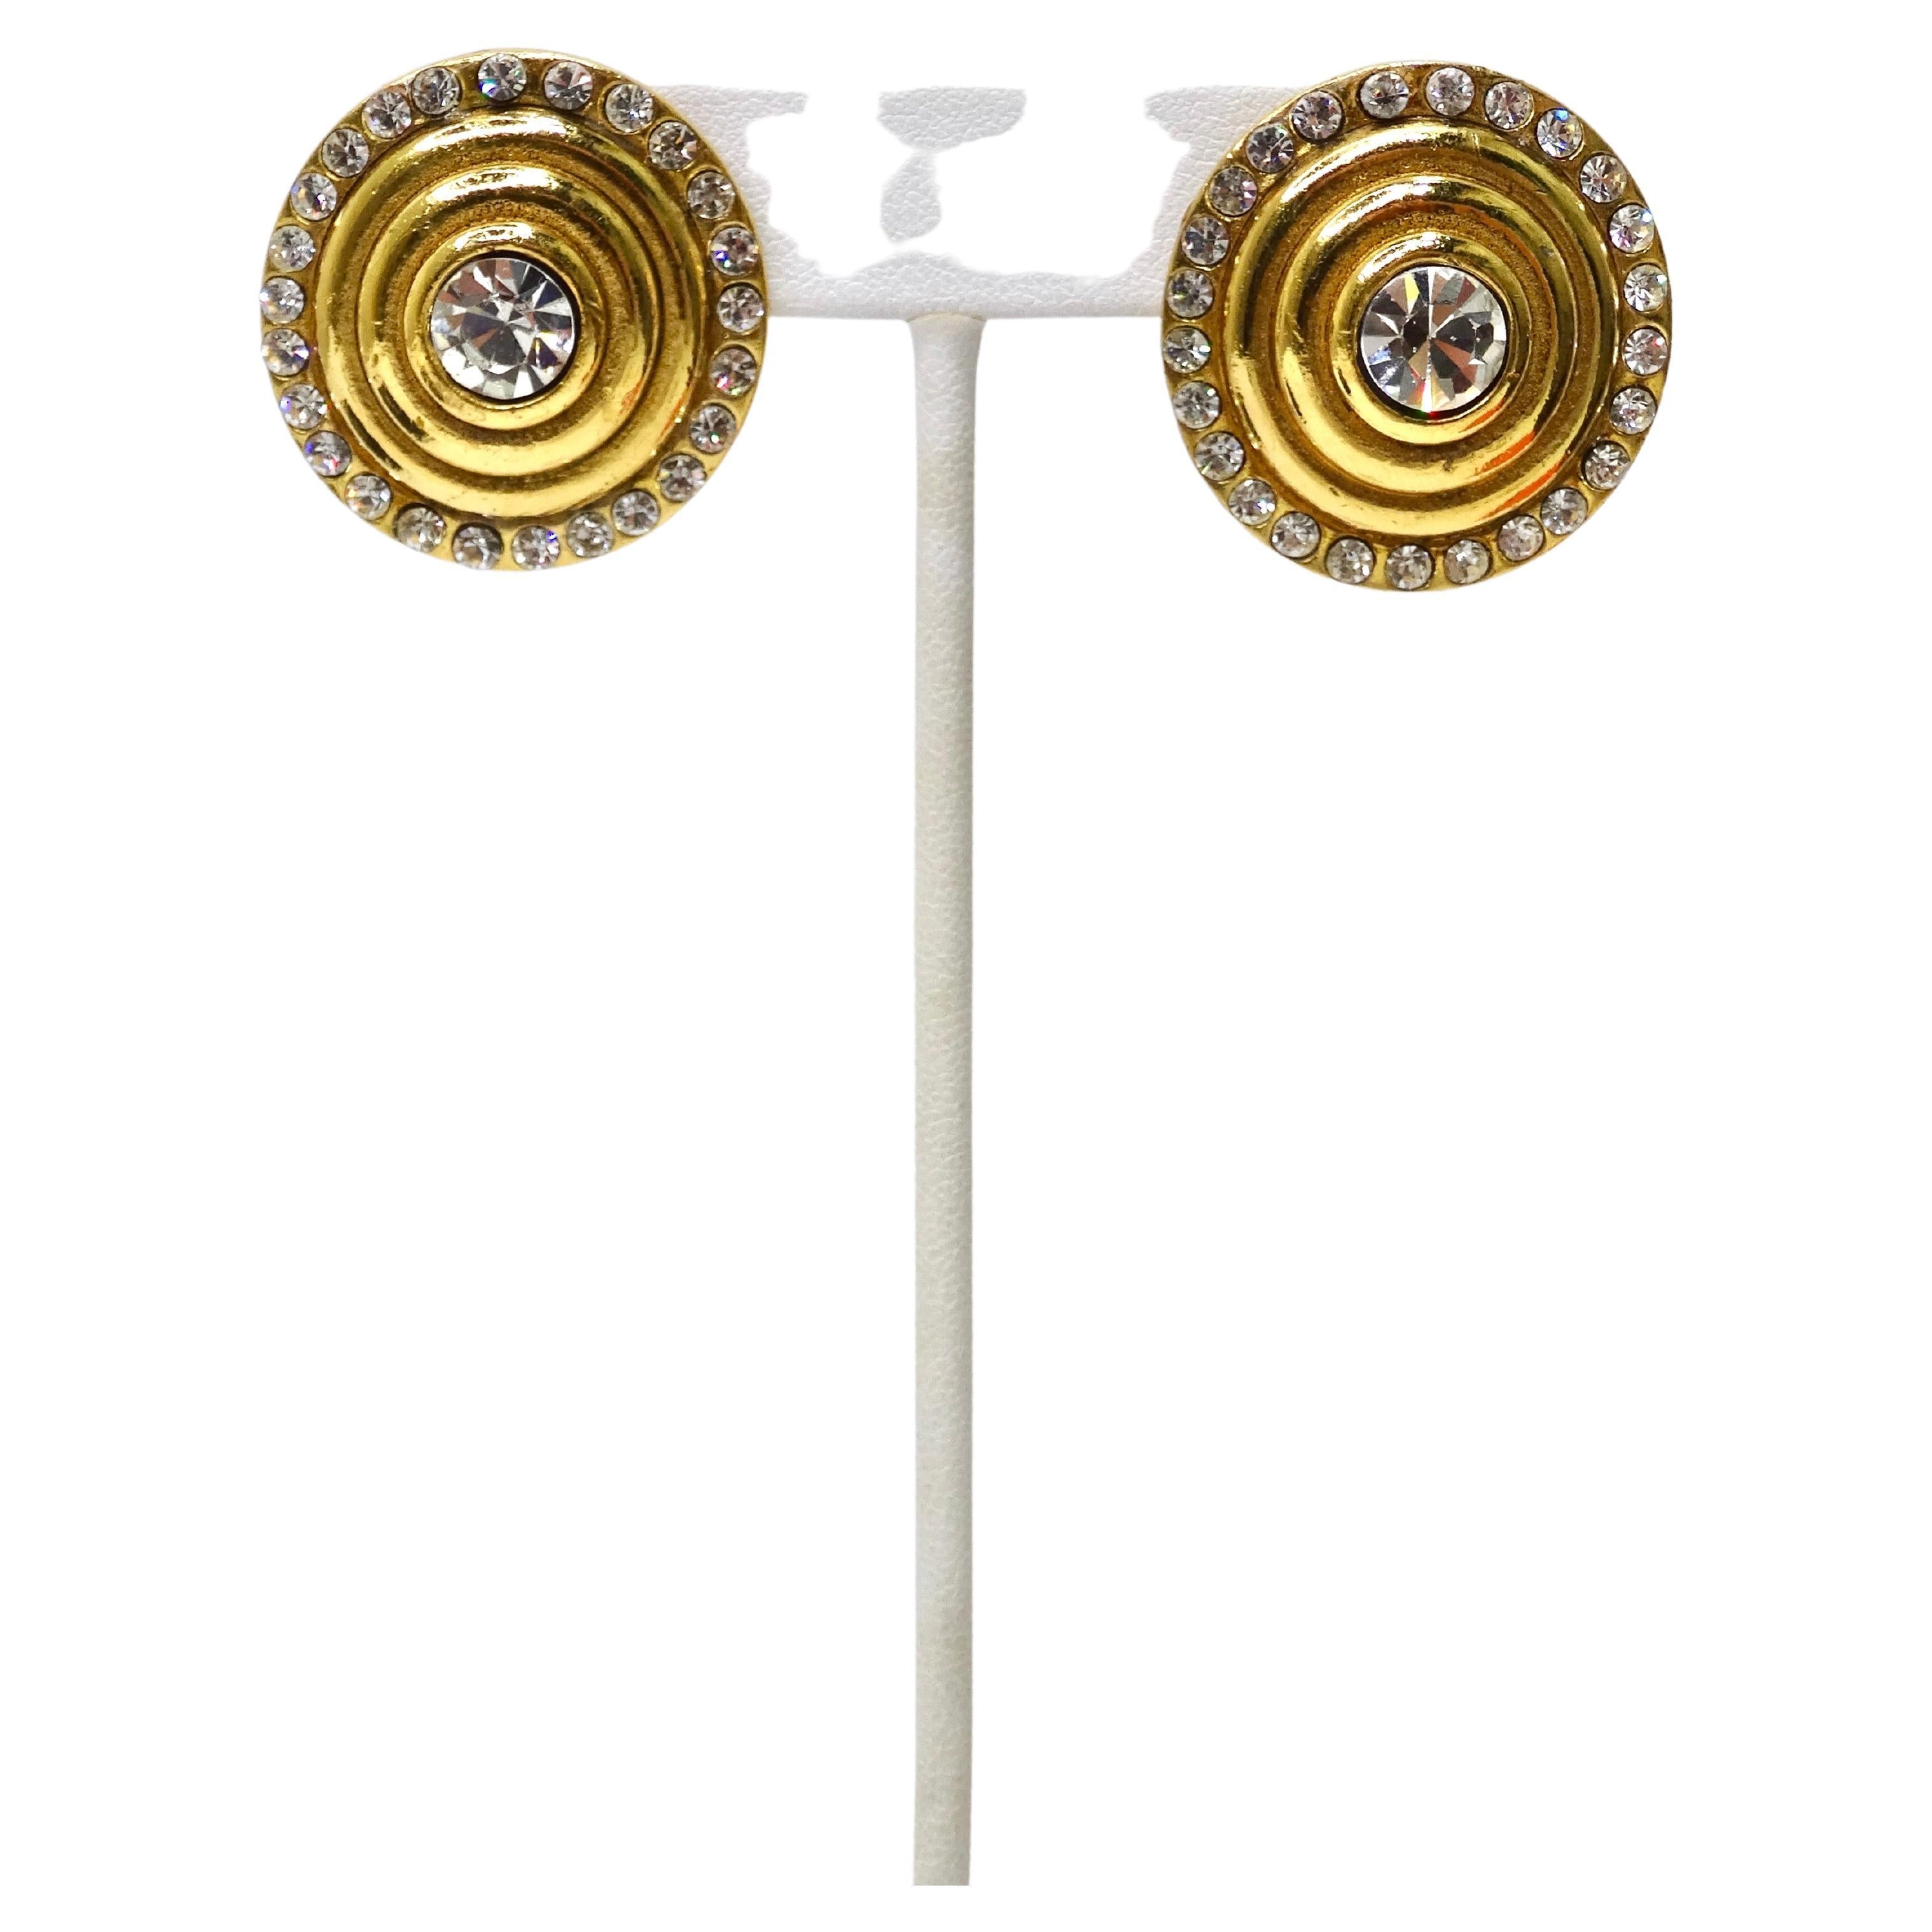 Chanel collectors right this way! These are beautiful Chanel clip on earrings featuring a large center crystal rhinestone in a vibrant gold tone metal. They are completely surrounded by small rhinestones accompanied by one large crystal in the